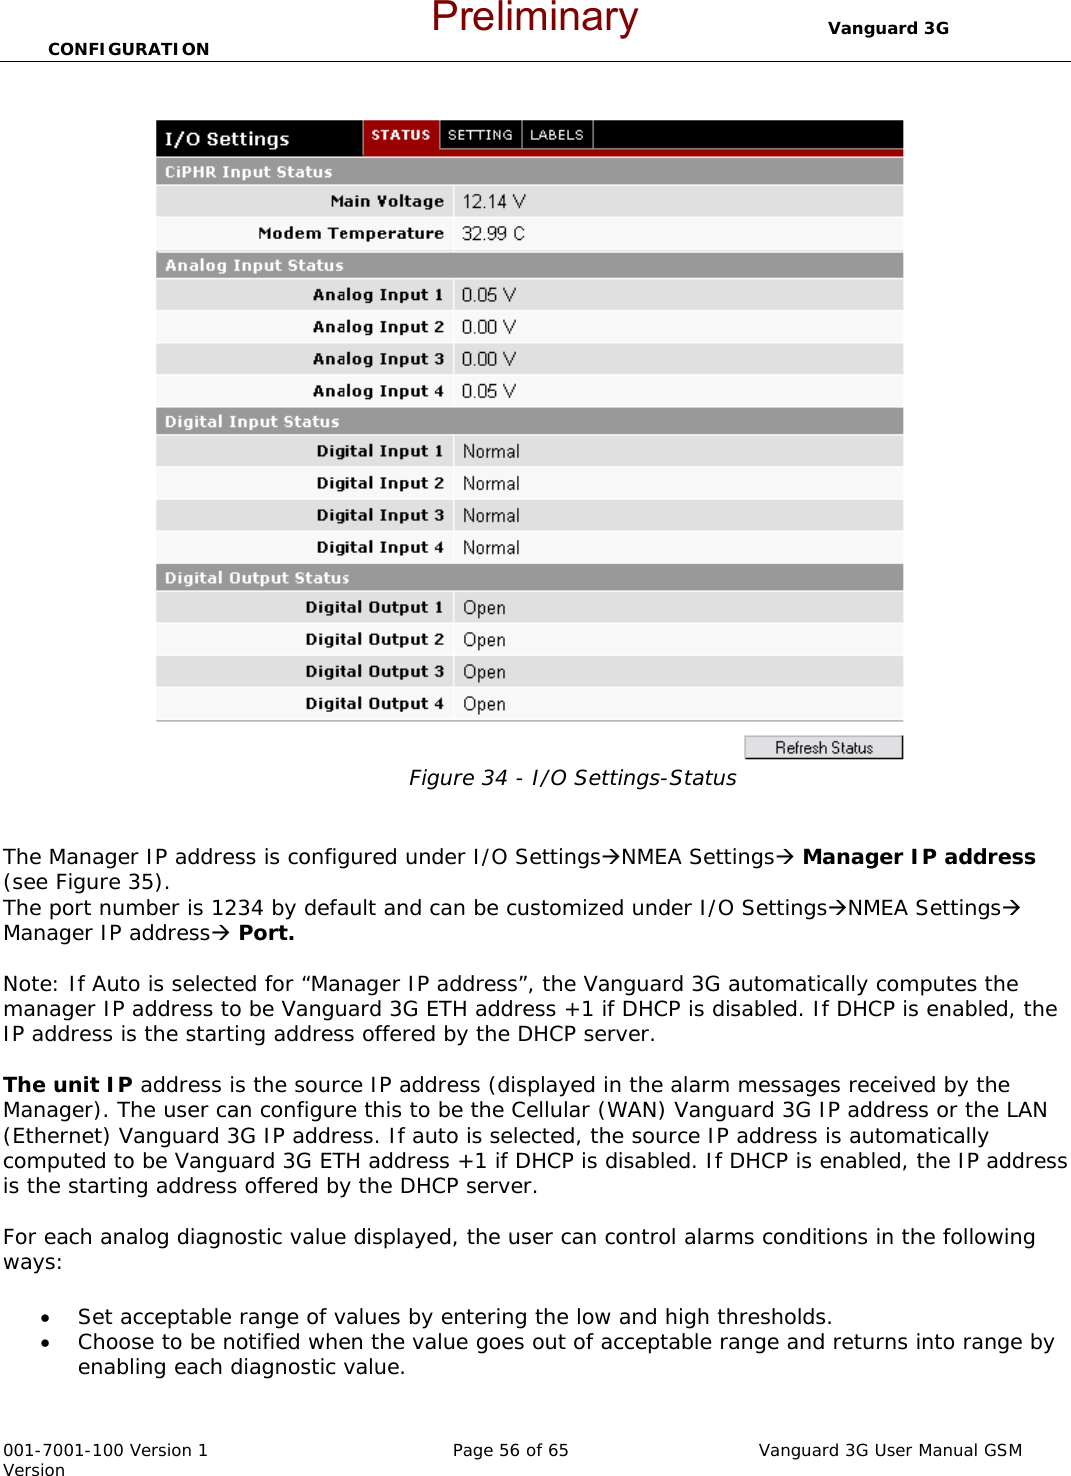                                  Vanguard 3G CONFIGURATION  001-7001-100 Version 1       Page 56 of 65       Vanguard 3G User Manual GSM Version  Figure 34 - I/O Settings-Status   The Manager IP address is configured under I/O SettingsÆNMEA SettingsÆ Manager IP address (see Figure 35).  The port number is 1234 by default and can be customized under I/O SettingsÆNMEA SettingsÆ Manager IP addressÆ Port.  Note: If Auto is selected for “Manager IP address”, the Vanguard 3G automatically computes the manager IP address to be Vanguard 3G ETH address +1 if DHCP is disabled. If DHCP is enabled, the IP address is the starting address offered by the DHCP server.   The unit IP address is the source IP address (displayed in the alarm messages received by the Manager). The user can configure this to be the Cellular (WAN) Vanguard 3G IP address or the LAN (Ethernet) Vanguard 3G IP address. If auto is selected, the source IP address is automatically computed to be Vanguard 3G ETH address +1 if DHCP is disabled. If DHCP is enabled, the IP address is the starting address offered by the DHCP server.  For each analog diagnostic value displayed, the user can control alarms conditions in the following ways:  • Set acceptable range of values by entering the low and high thresholds.  • Choose to be notified when the value goes out of acceptable range and returns into range by enabling each diagnostic value.  Preliminary